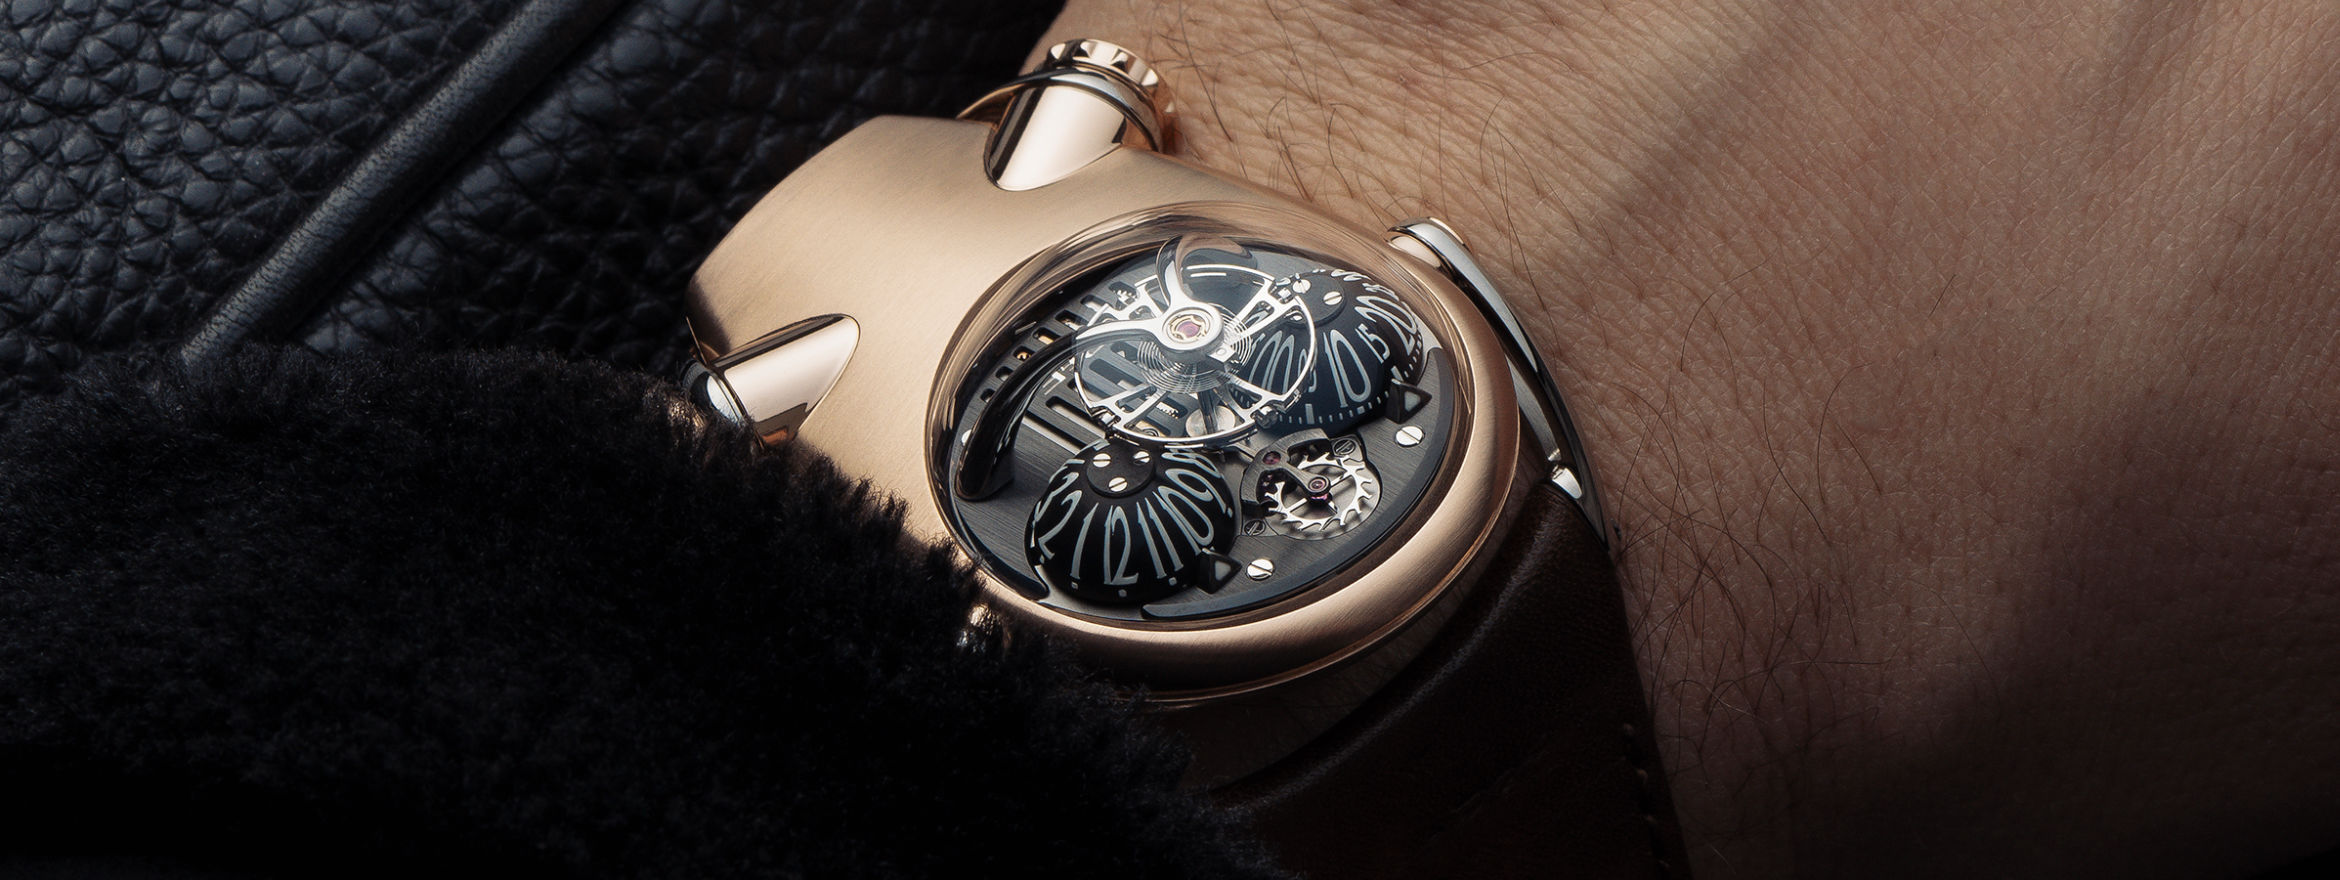 MB&F Horological Machines: A Thematic Evolution – The Animals